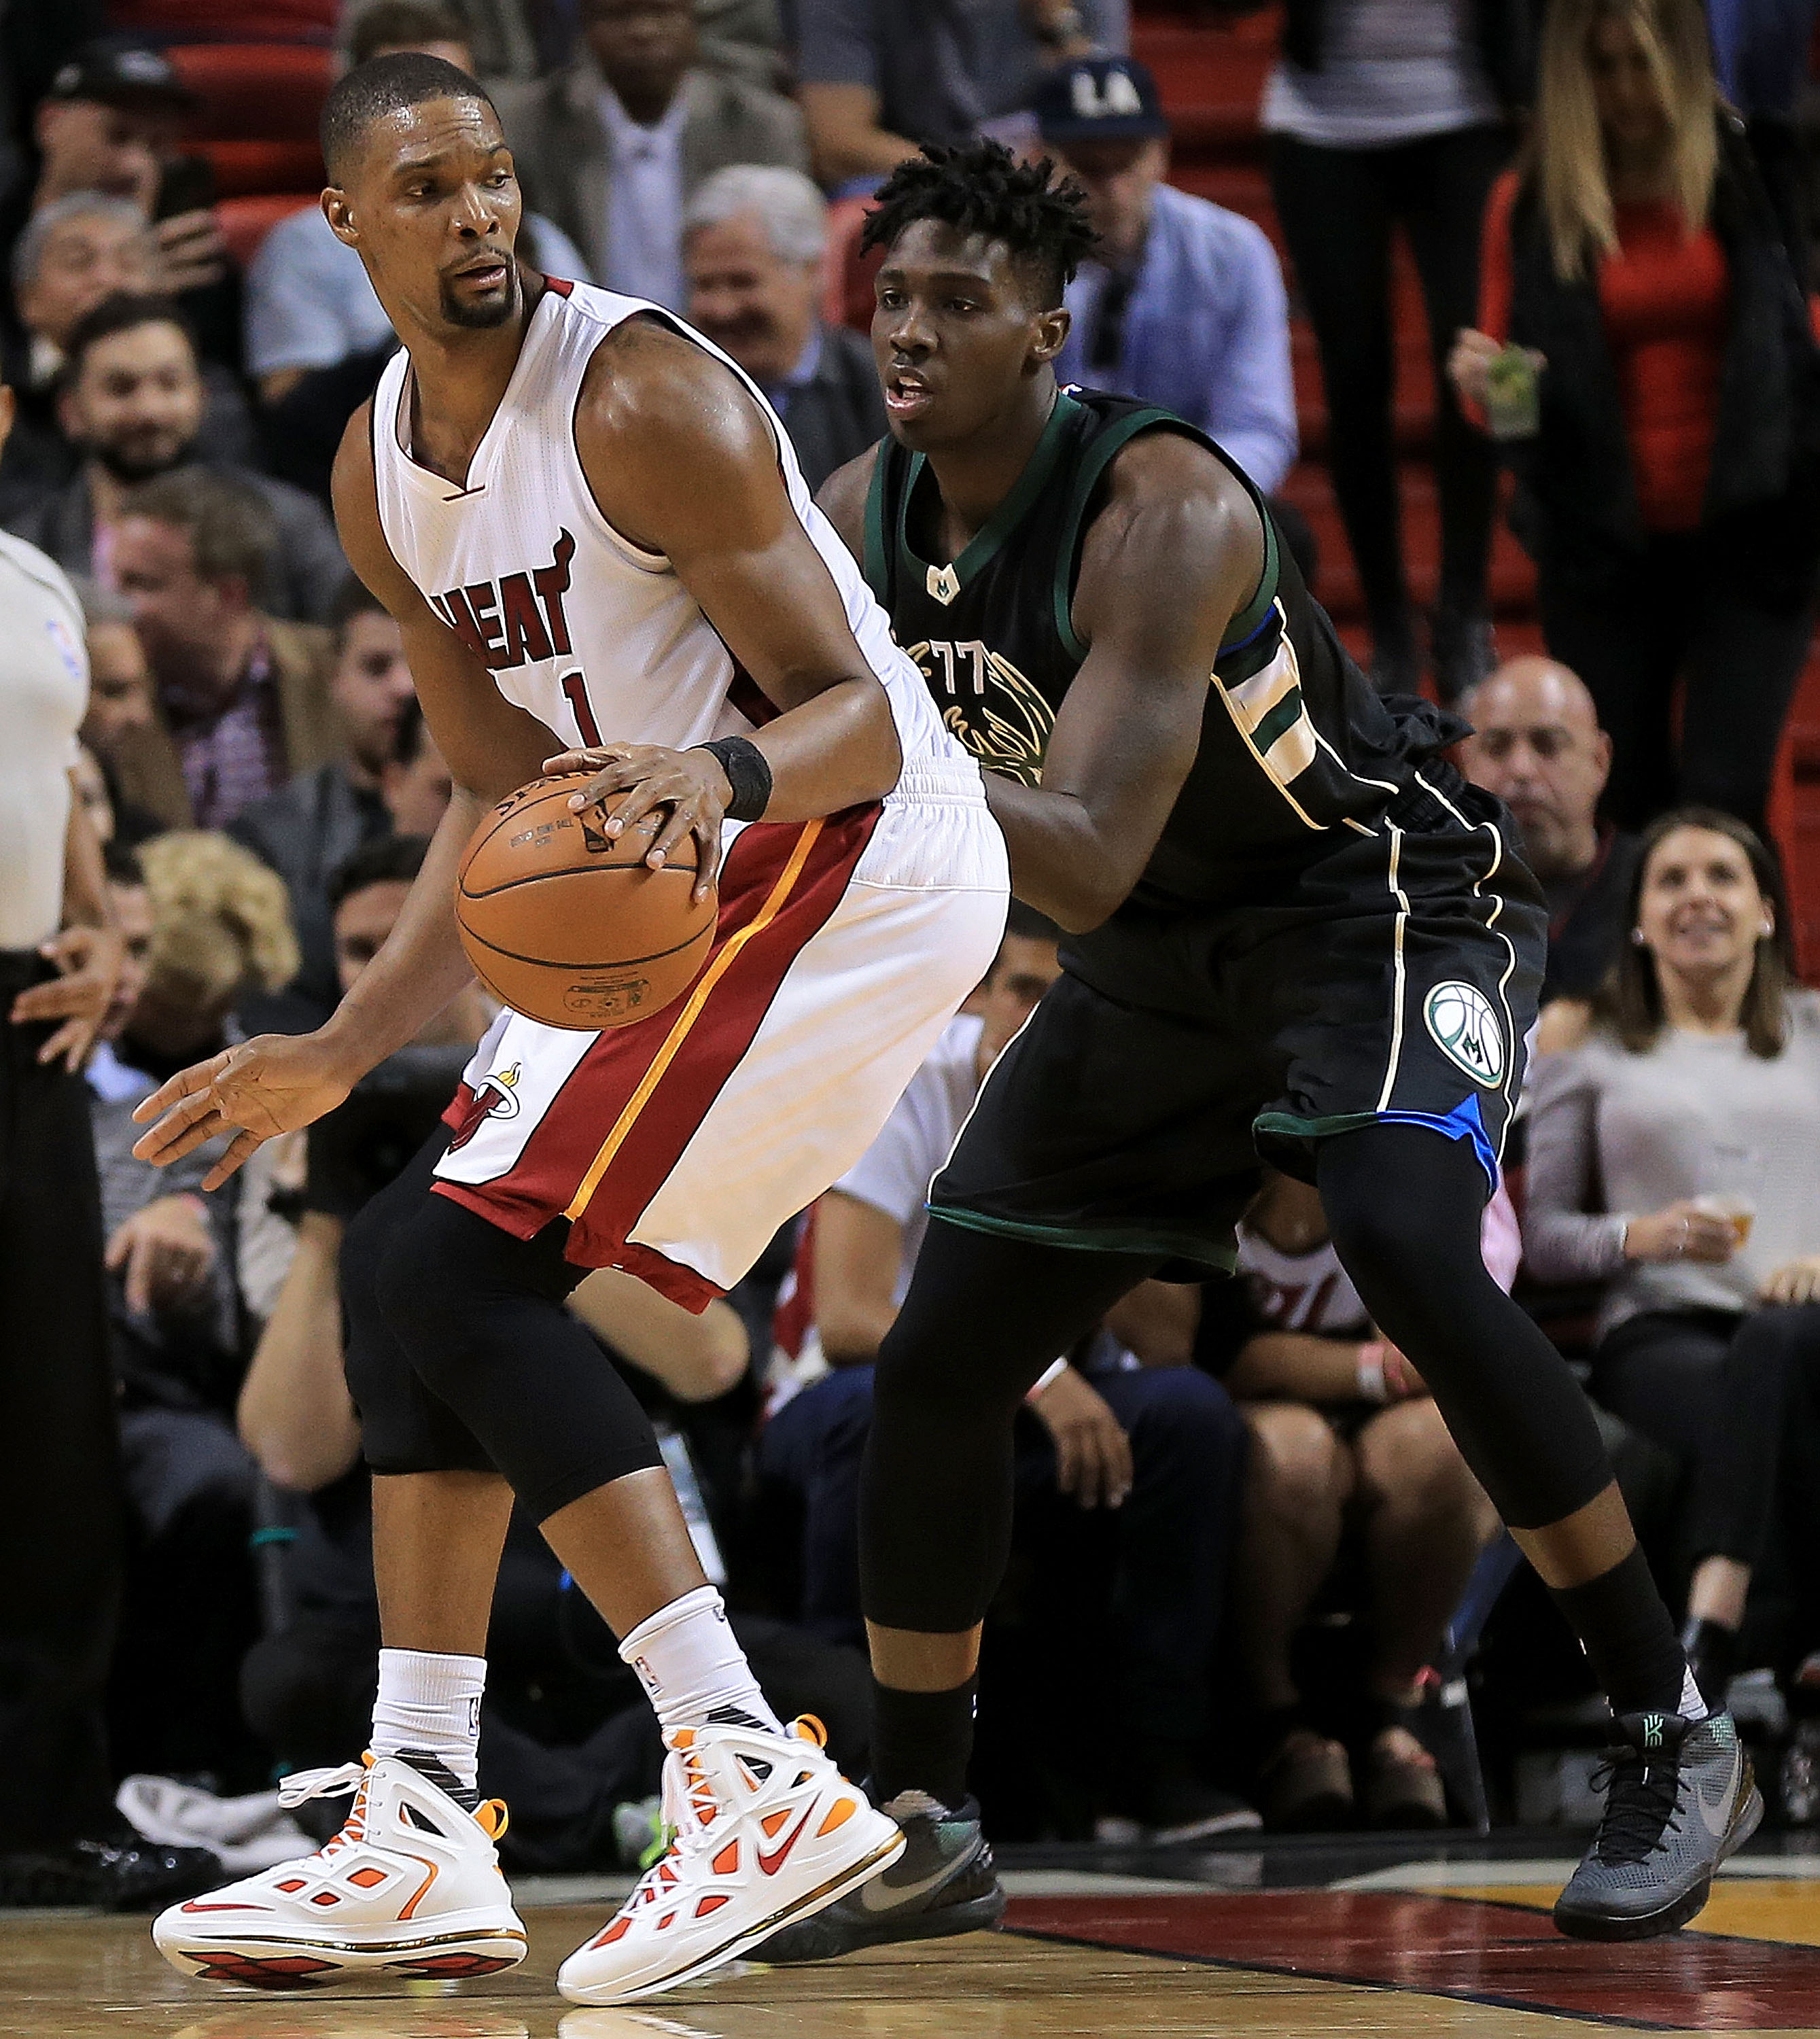 MIAMI, FL - JANUARY 19: Chris Bosh #1 of the Miami Heat shoots over Johnny O'Bryant III #77 of the Milwaukee Bucks during a game at American Airlines Arena on January 19, 2016 in Miami, Florida. NOTE TO USER: User expressly acknowledges and agrees that, by downloading and/or using this photograph, user is consenting to the terms and conditions of the Getty Images License Agreement. Mandatory copyright notice:   Mike Ehrmann/Getty Images/AFP